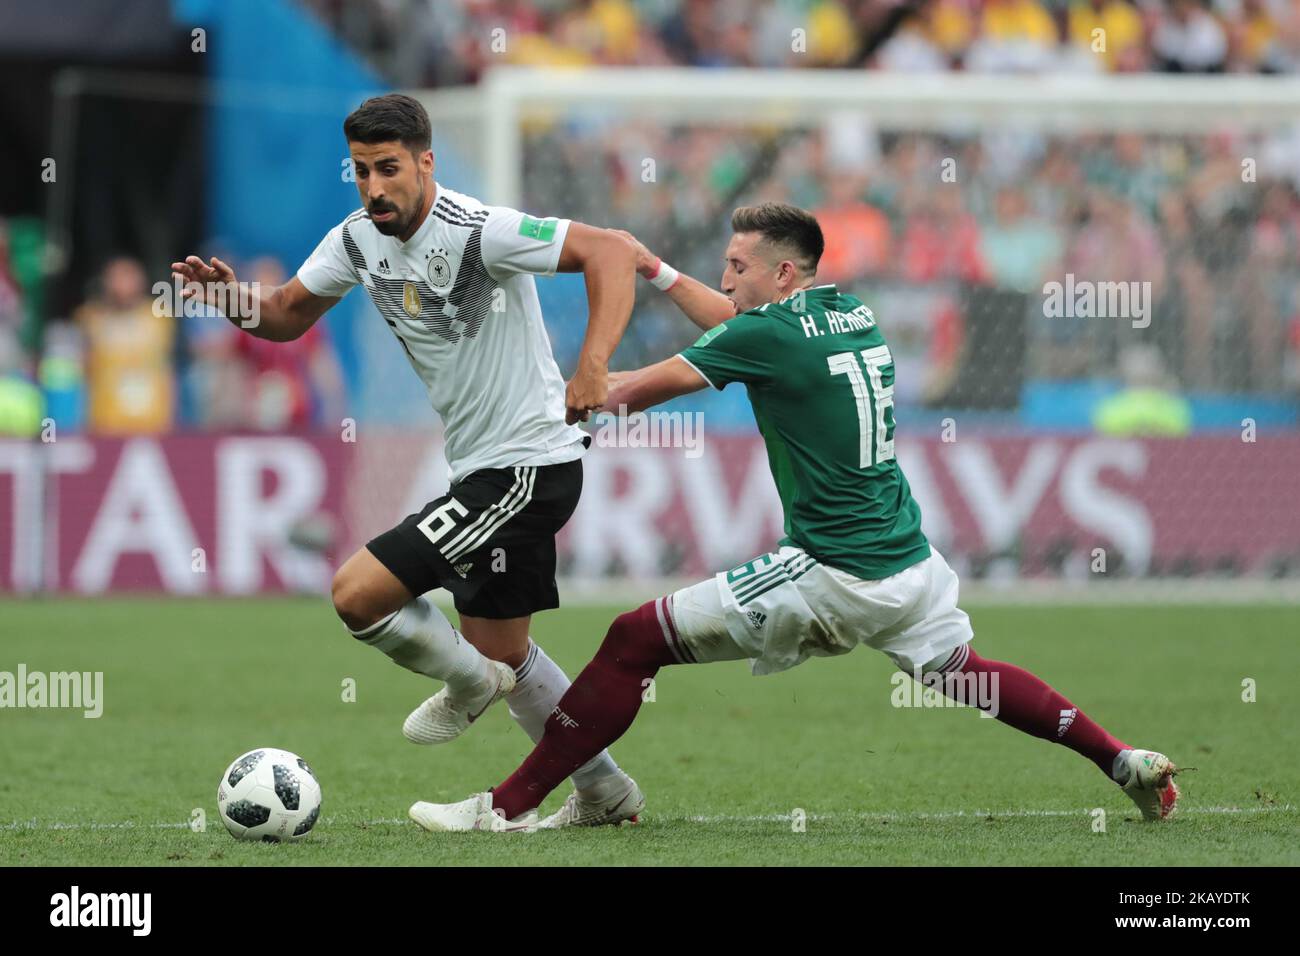 midfielder Sami Khedira of Germany National team and defender Hector Herrera of Mexico National team during the group F match between Germany and Mexico at the 2018 soccer World Cup at Luzhniki stadium in Moscow, Russia, Sunday, June 17, 2018. (Photo by Anatolij Medved/NurPhoto) Stock Photo